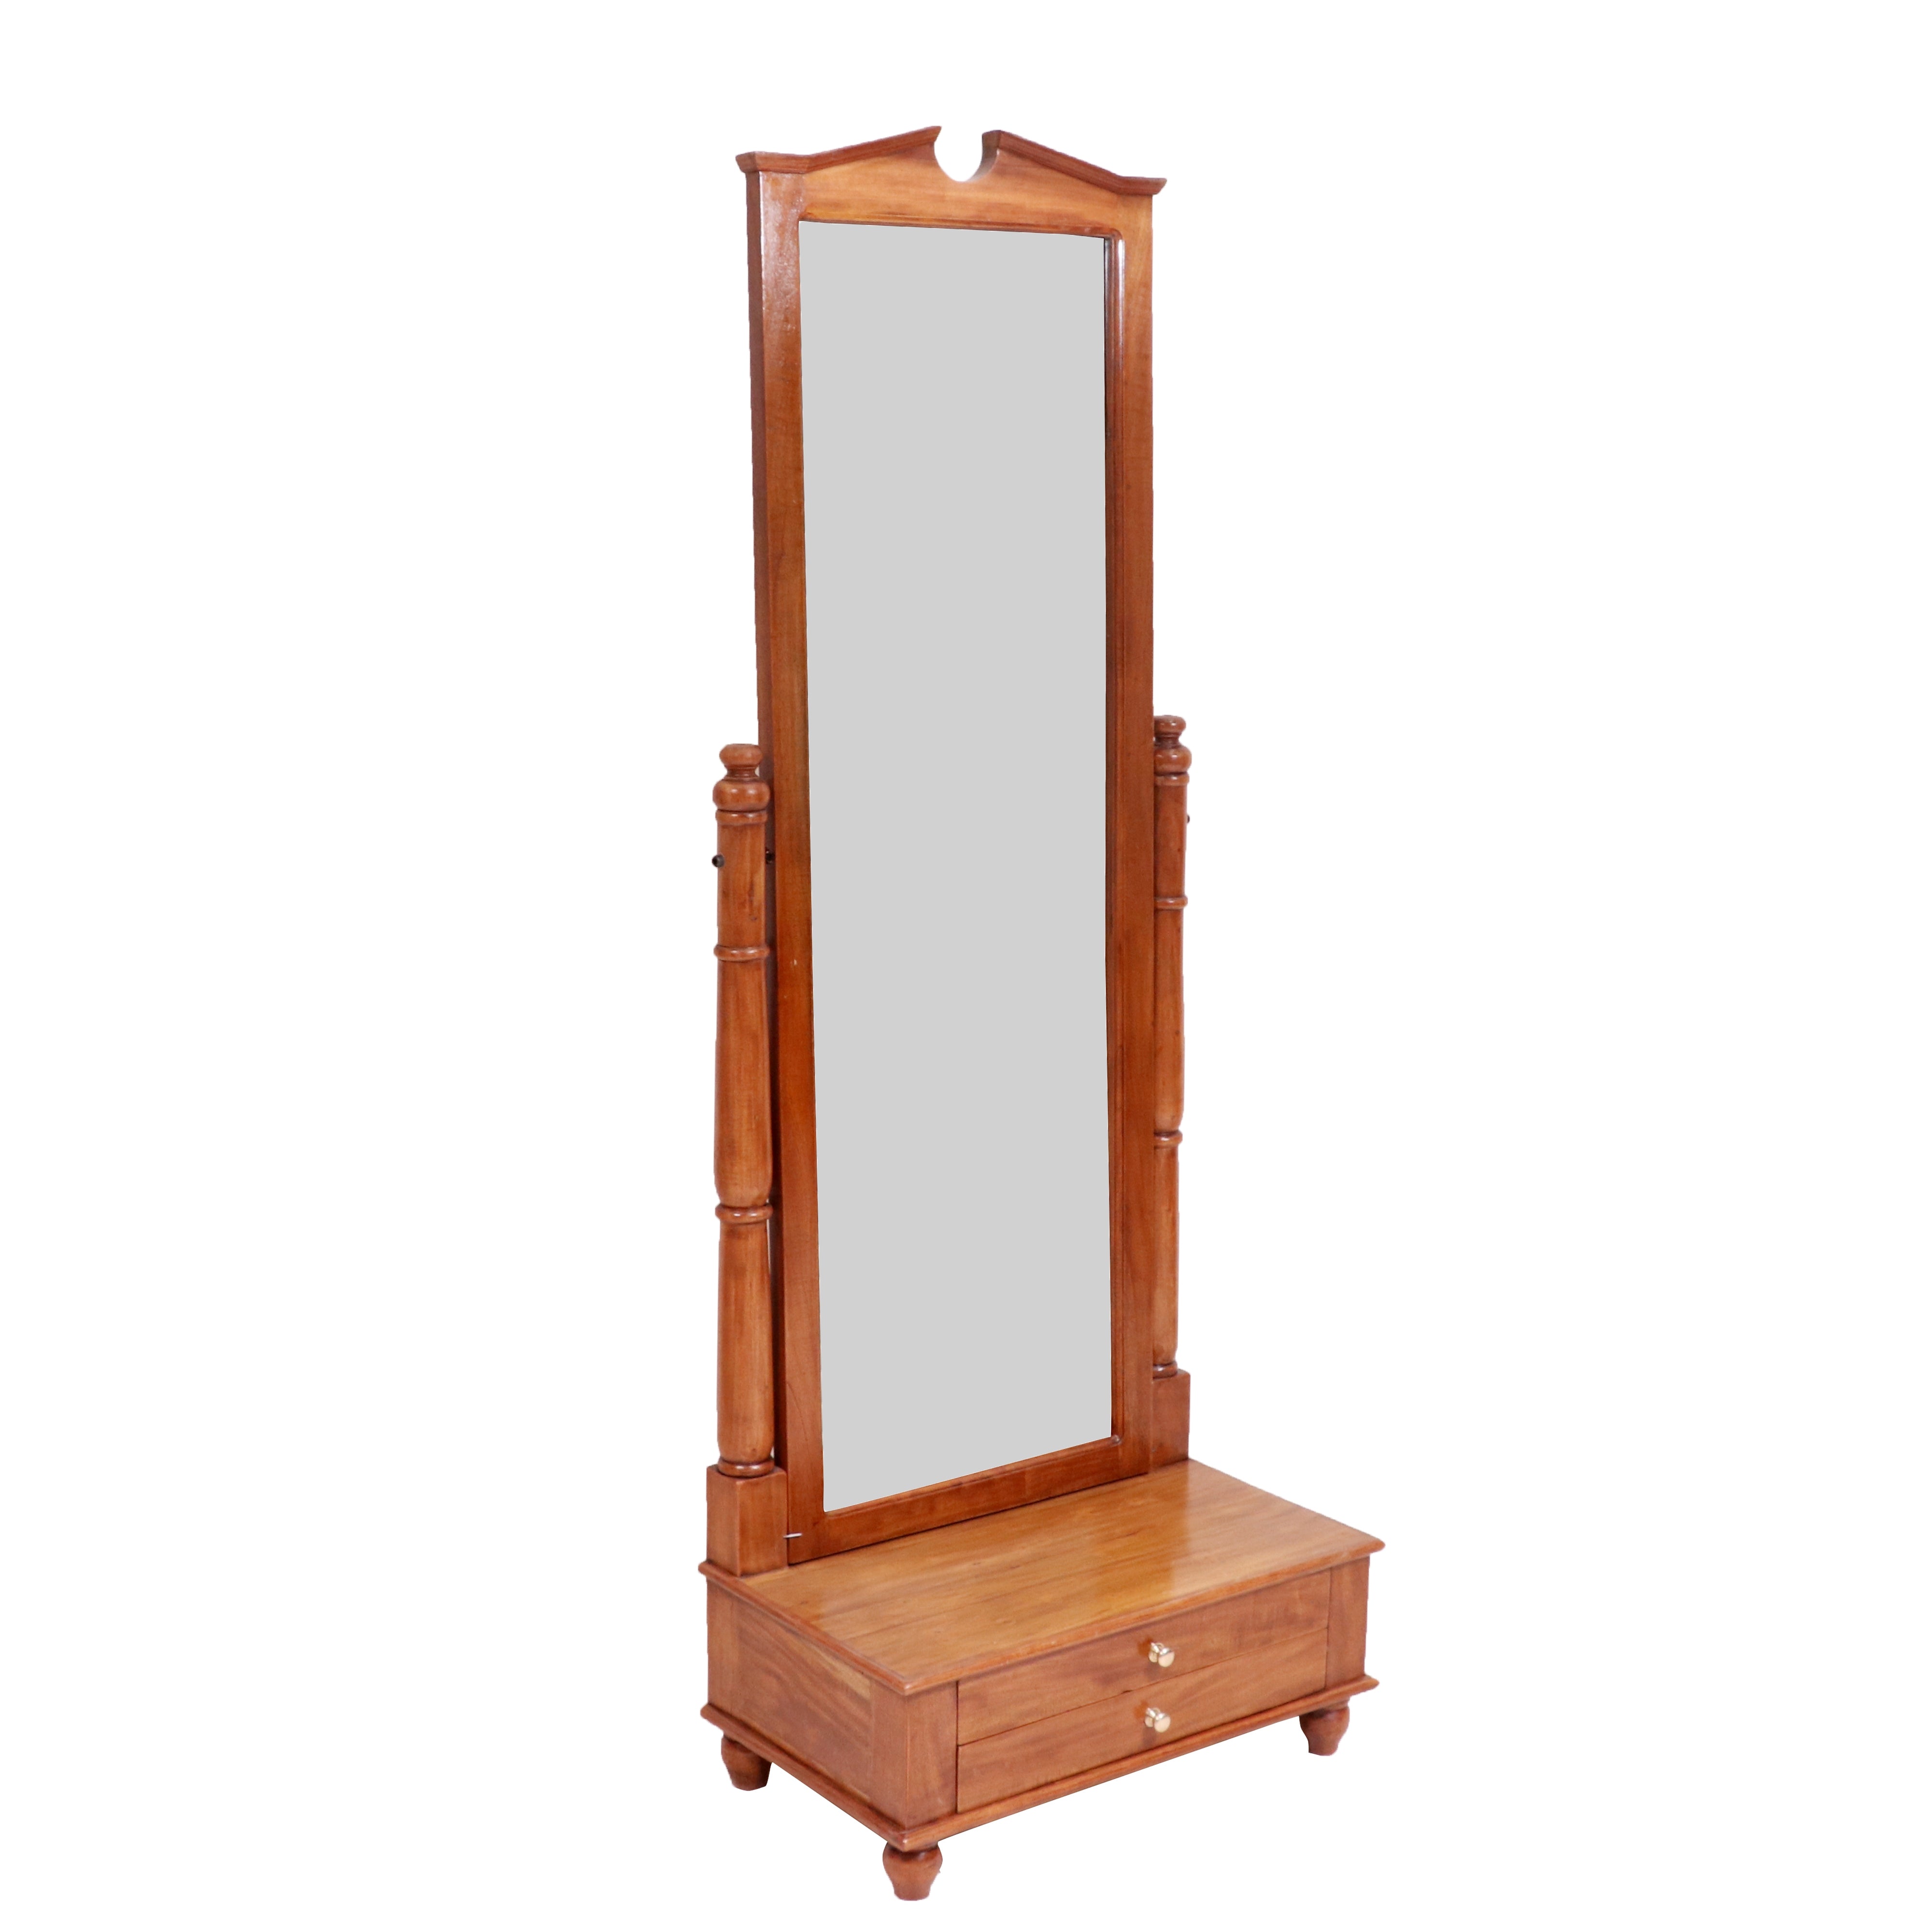 Rectangular Wooden Dressing Table at Rs 3,000 / Piece | M/s Laddu Furnitures